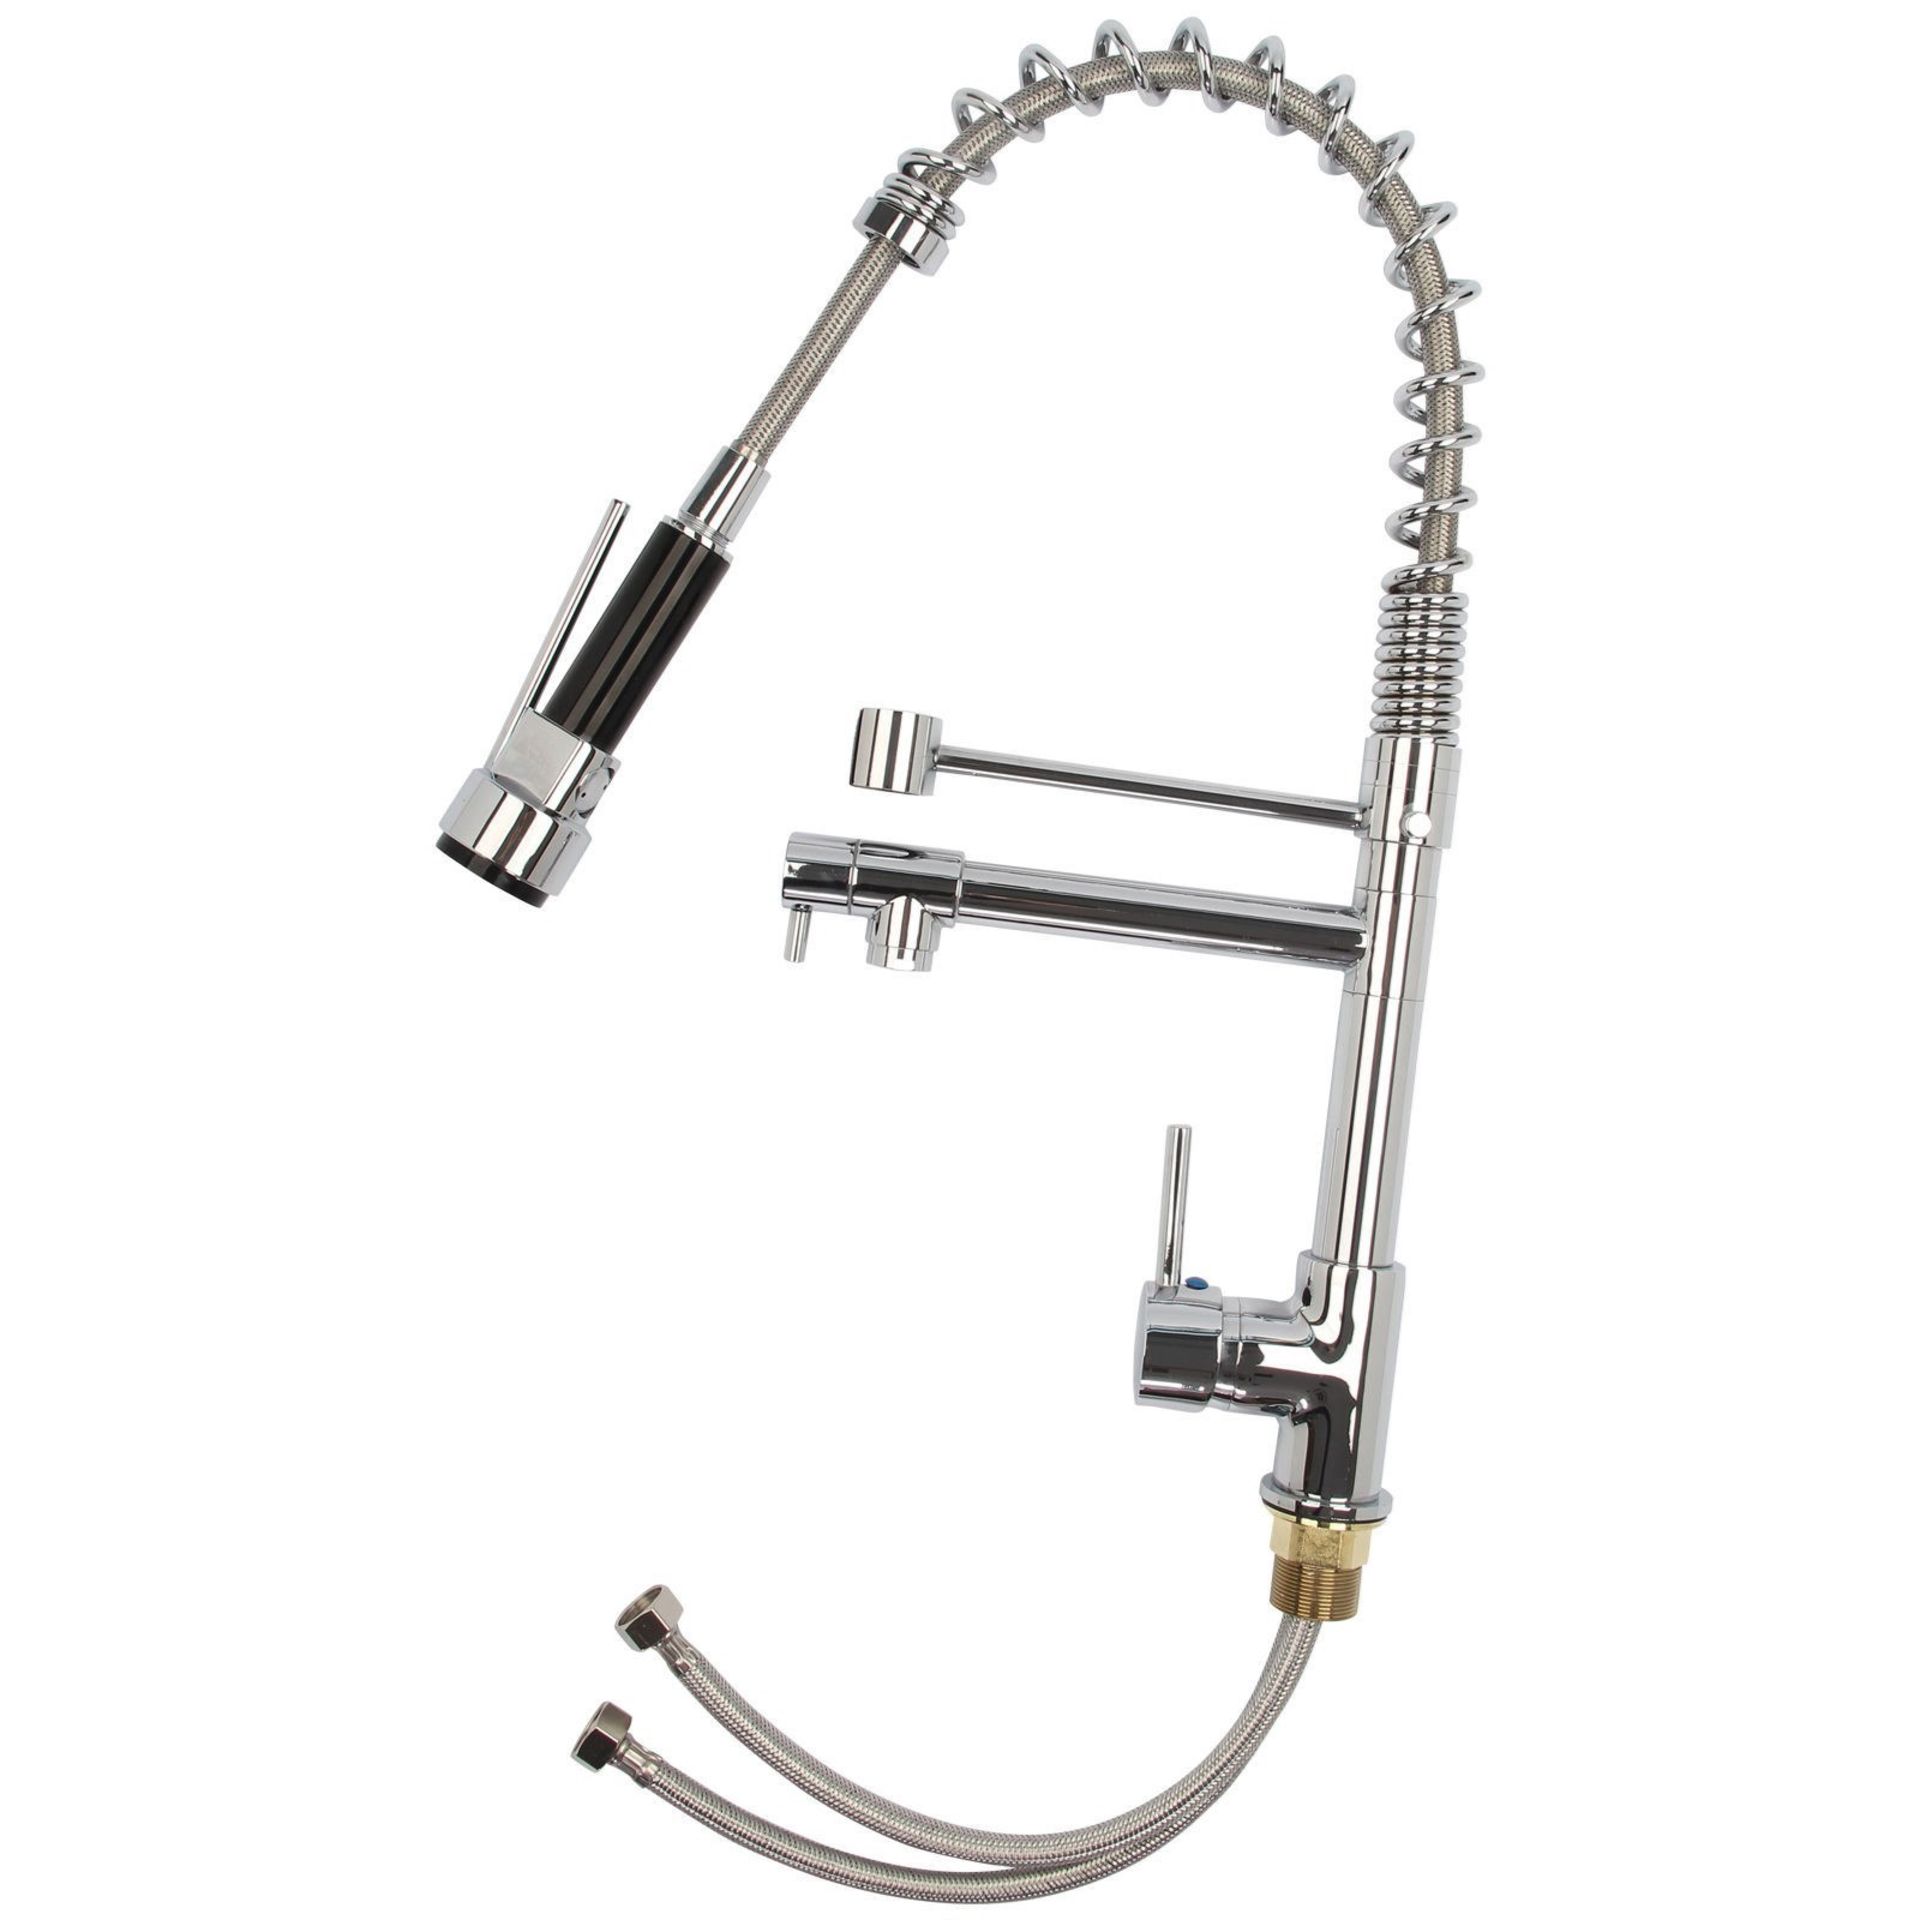 Bentley Modern Monobloc Chrome Brass Pull Out Spray Mixer Tap. RRP £349.99. This tap is from our - Image 2 of 3